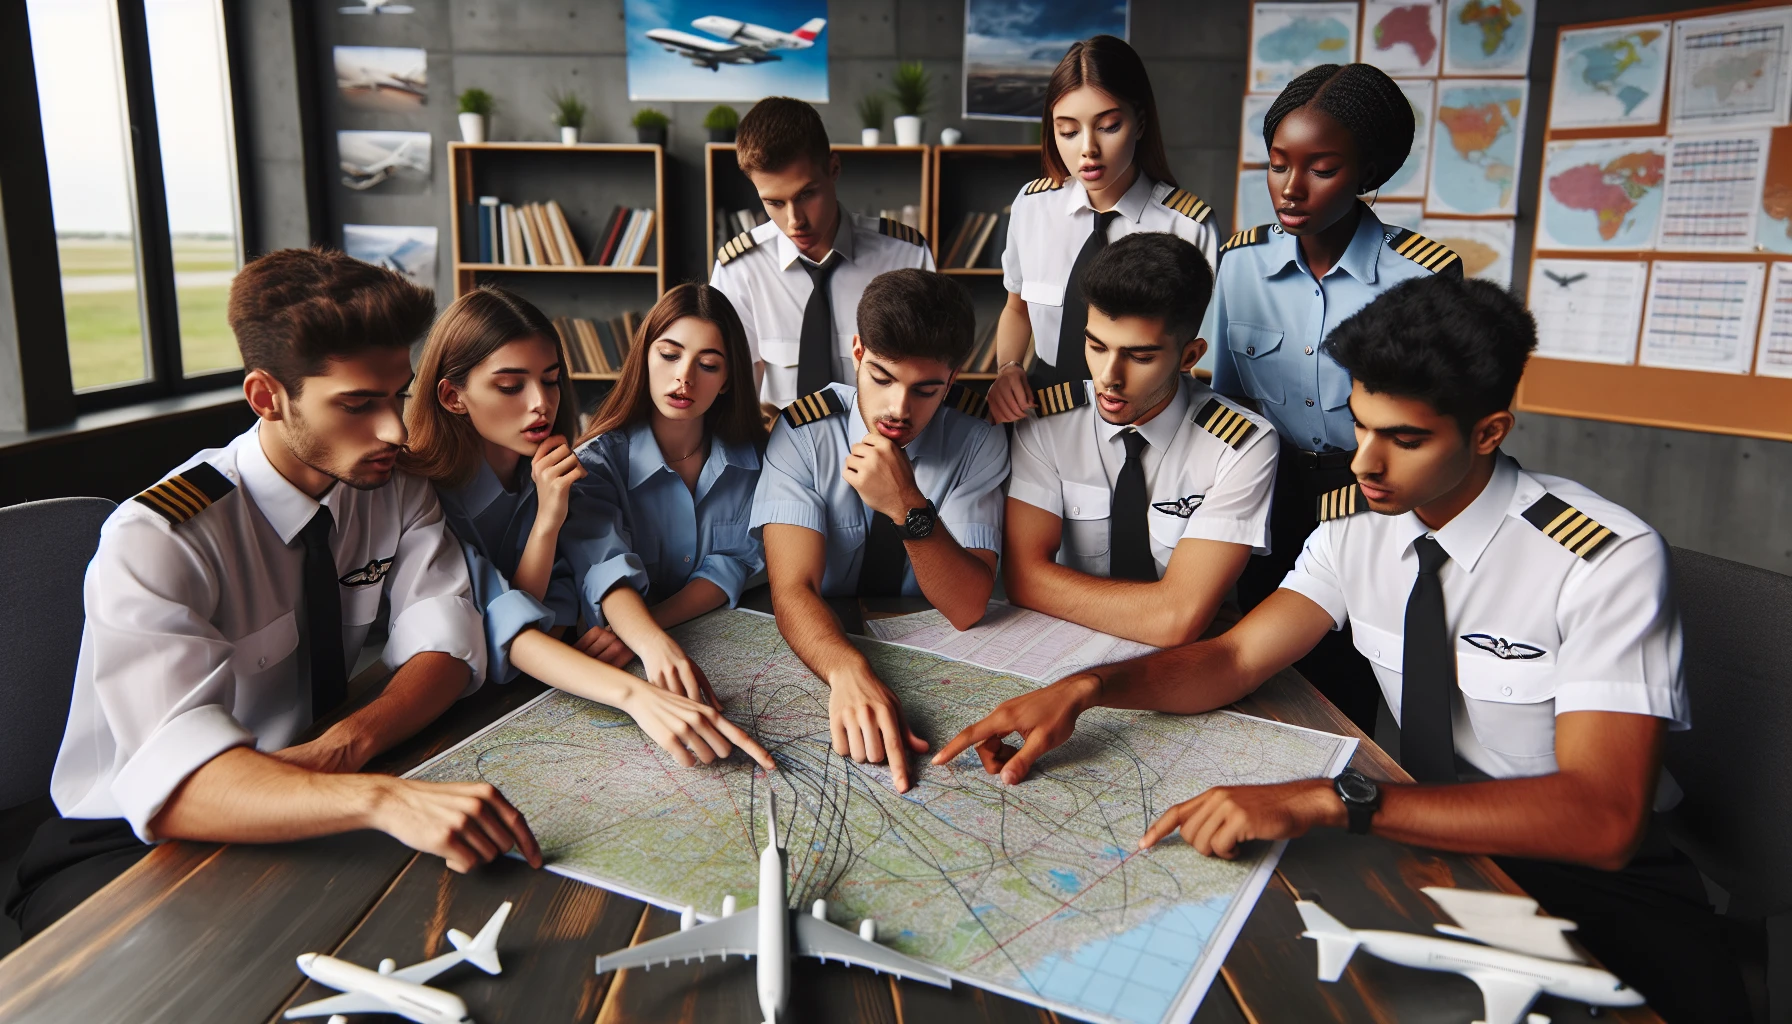 Illustration of diverse group of student pilots studying together